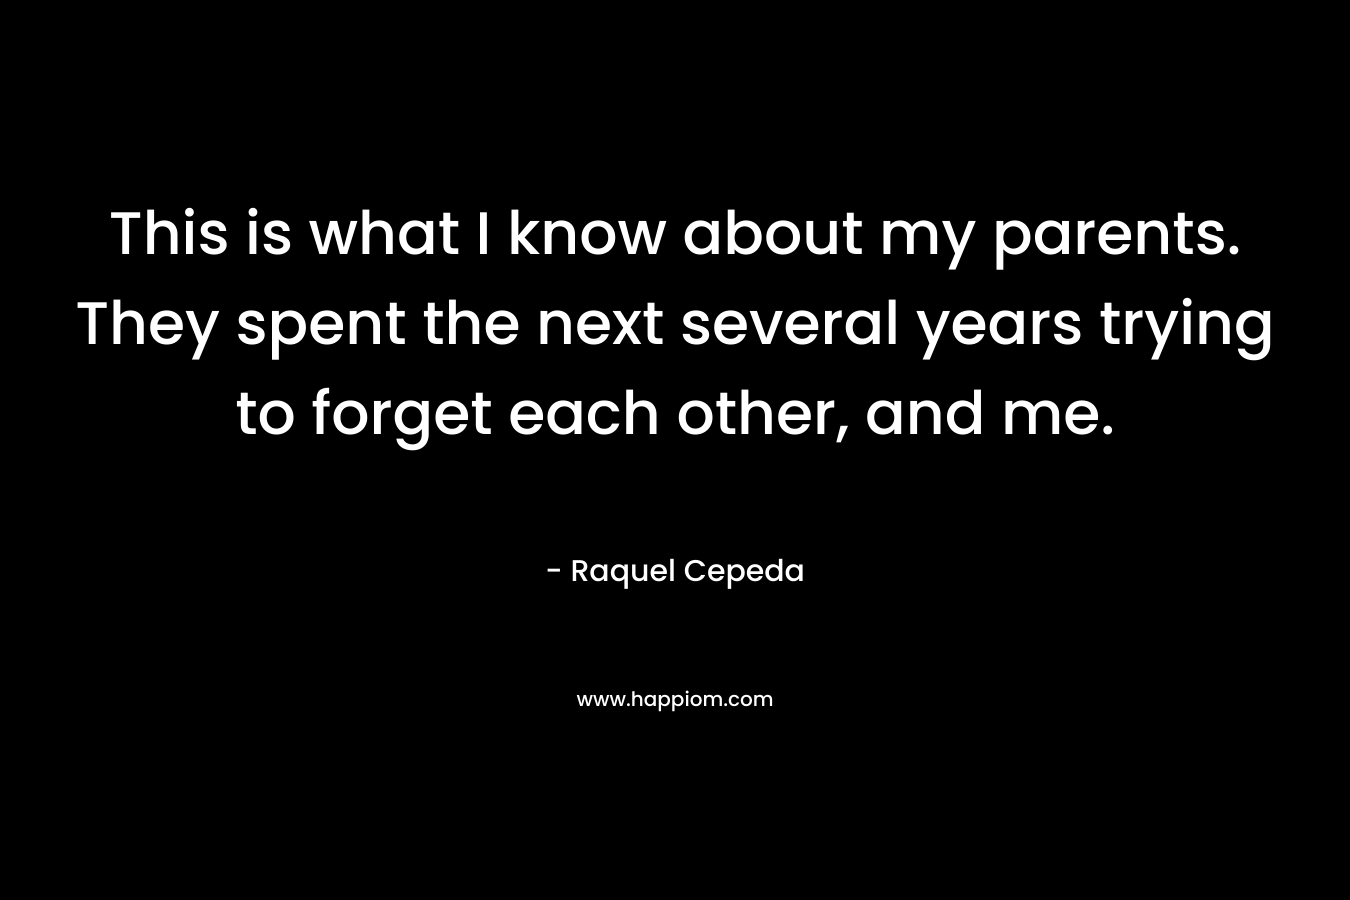 This is what I know about my parents. They spent the next several years trying to forget each other, and me. – Raquel Cepeda